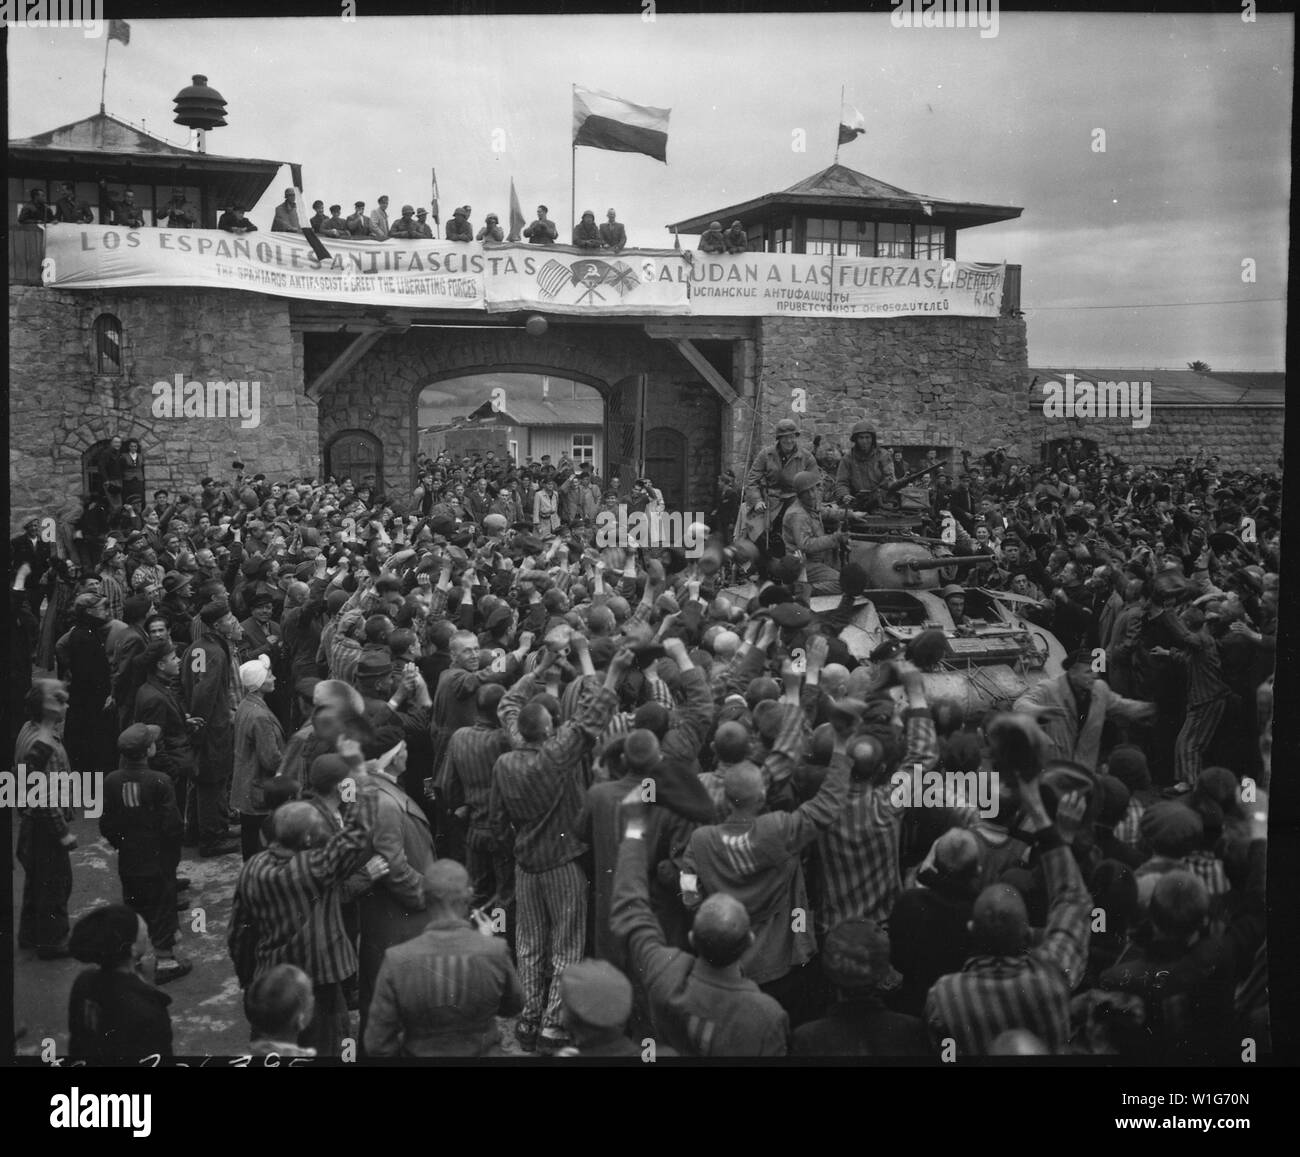 Liberated prisoners in the Mauthausen concentration camp near Linz, Austria, give rousing welcome to Cavalrymen of the 11th Armored Division. The banner across the wall was made by Spanish Loyalist prisoners.; General notes:  Use War and Conflict Number 1299 when ordering a reproduction or requesting information about this image. Stock Photo